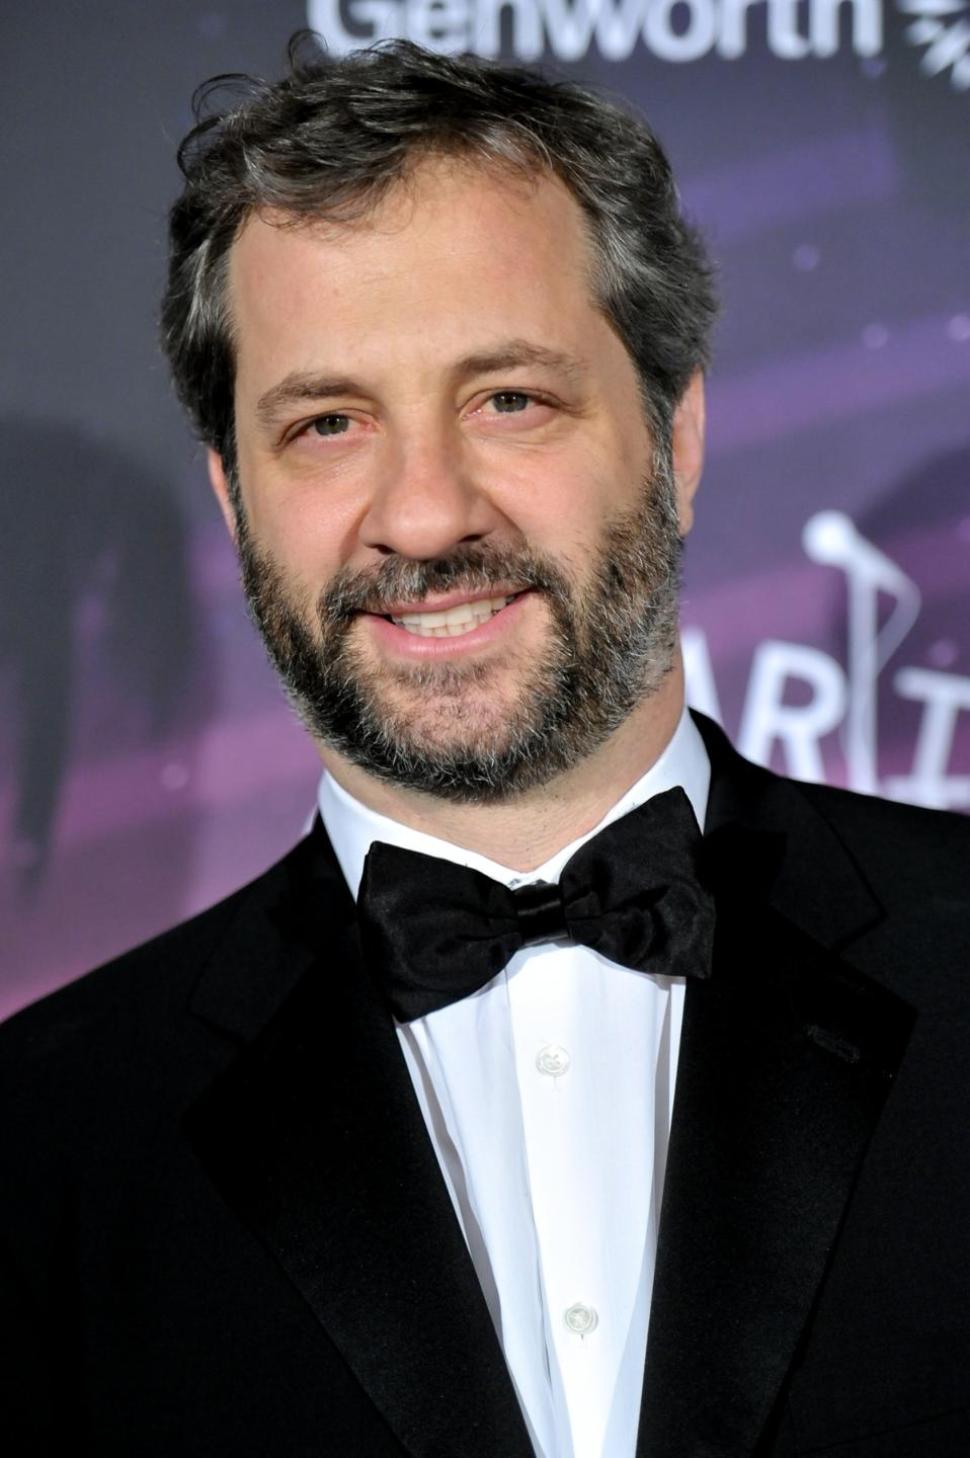 Judd Apatow sparked a heated debate between Cosby supporters and those calling for the embattled comic’s shows to be canned.